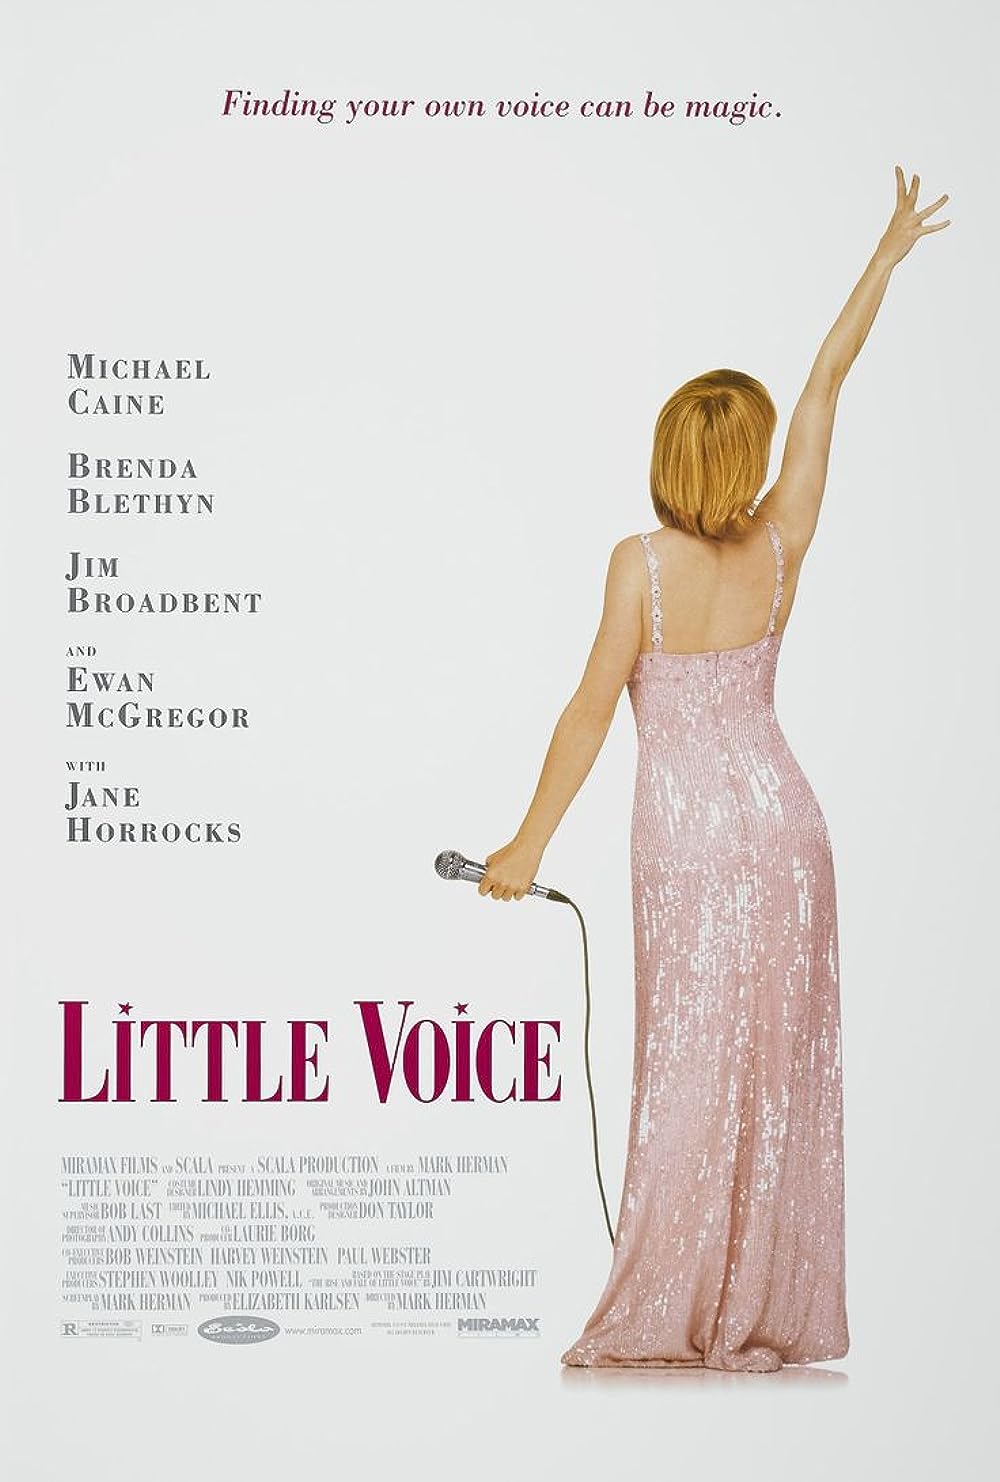 Poster for "Little Voice" (1998)